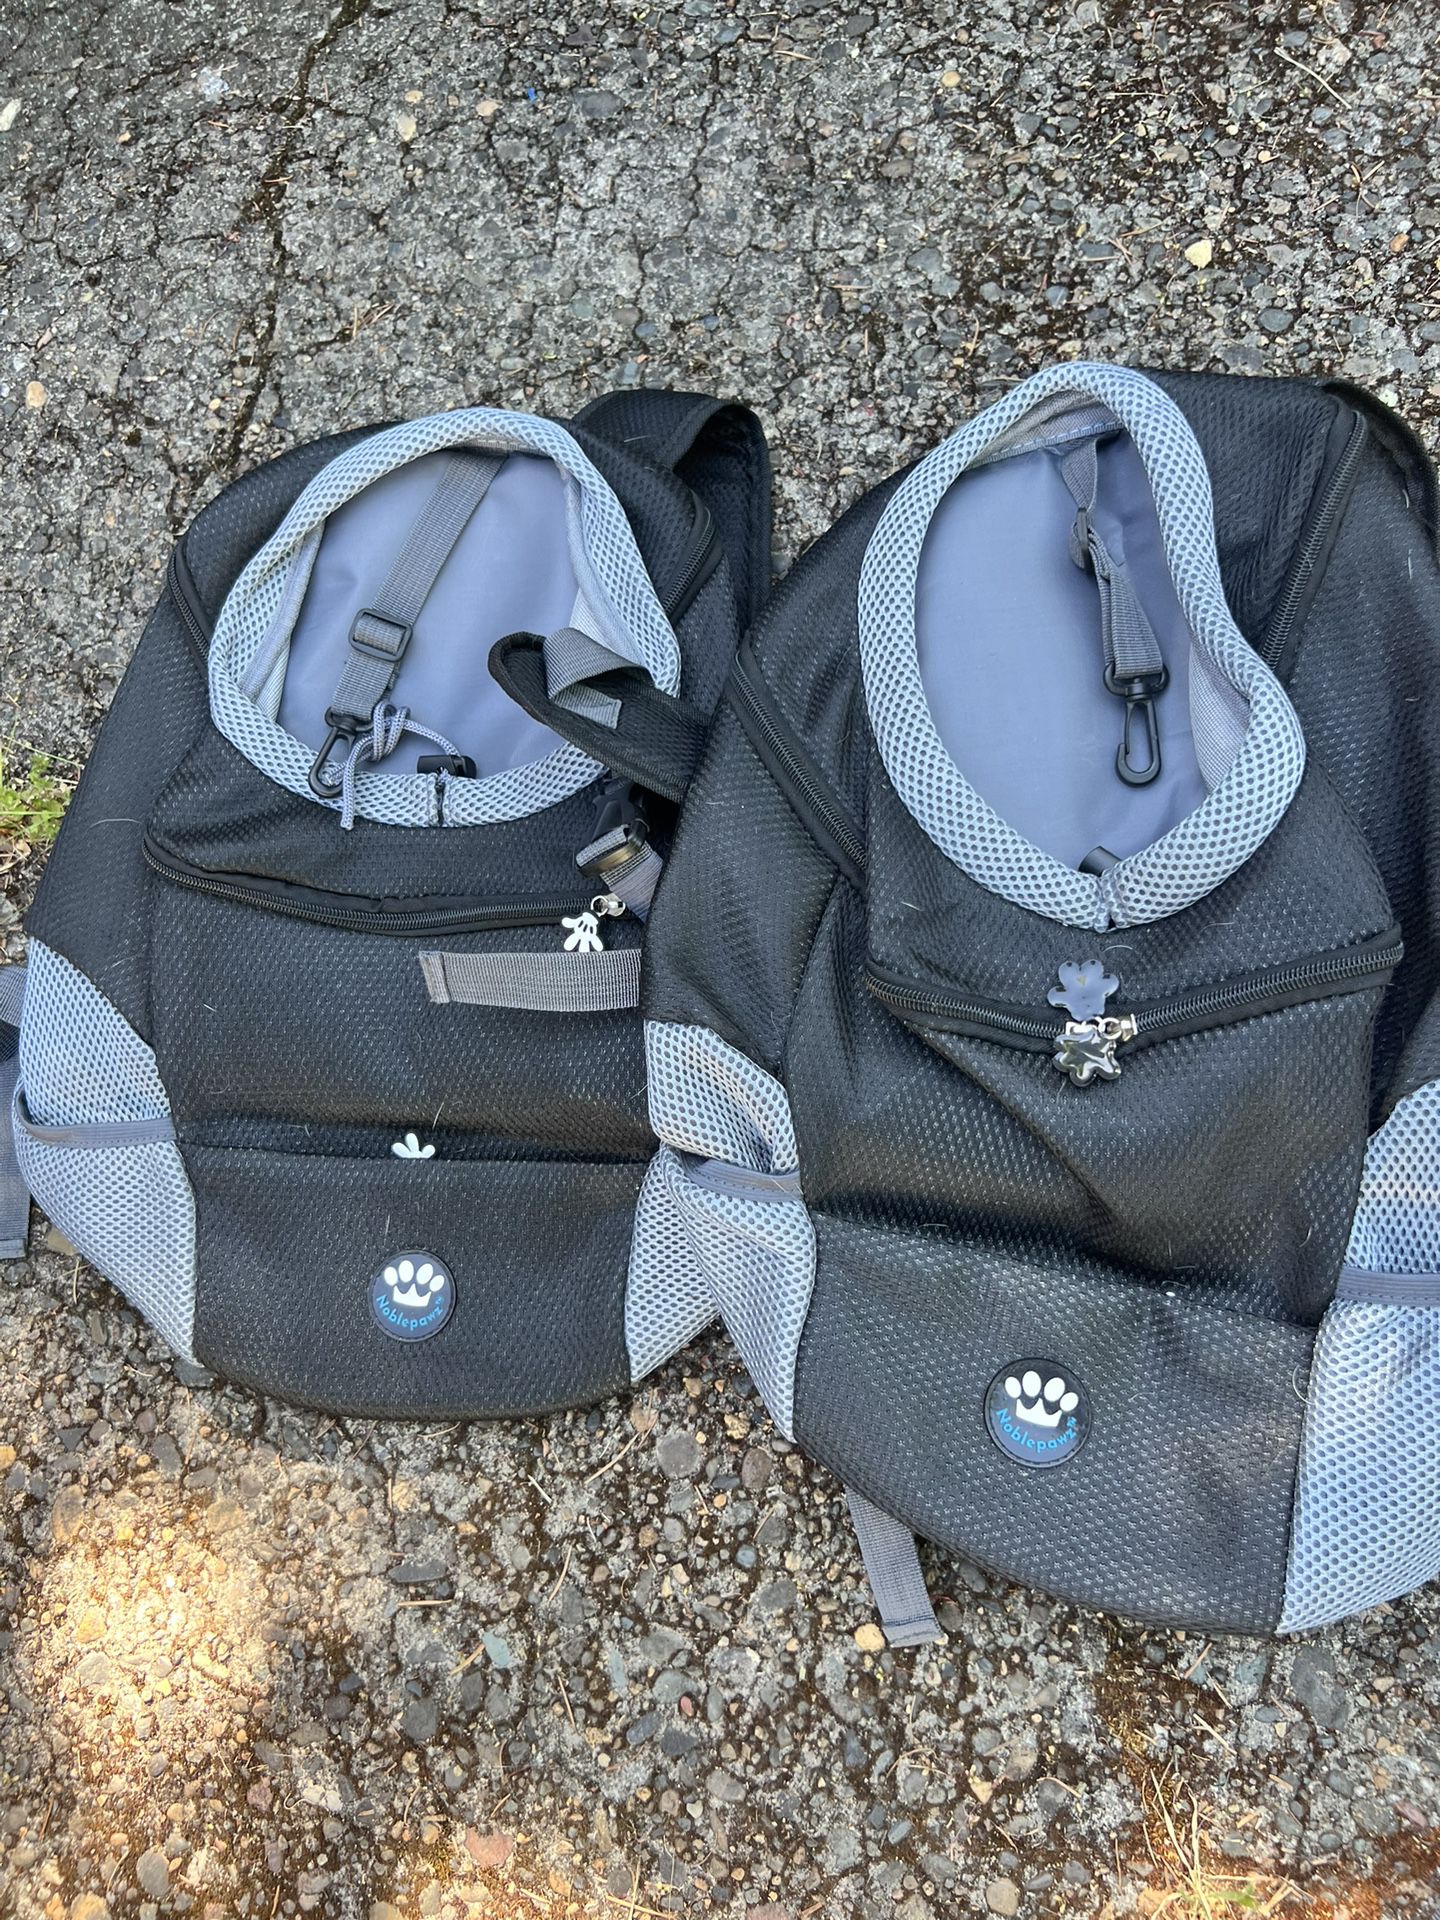 Back Packs For Small Dogs Or Cats